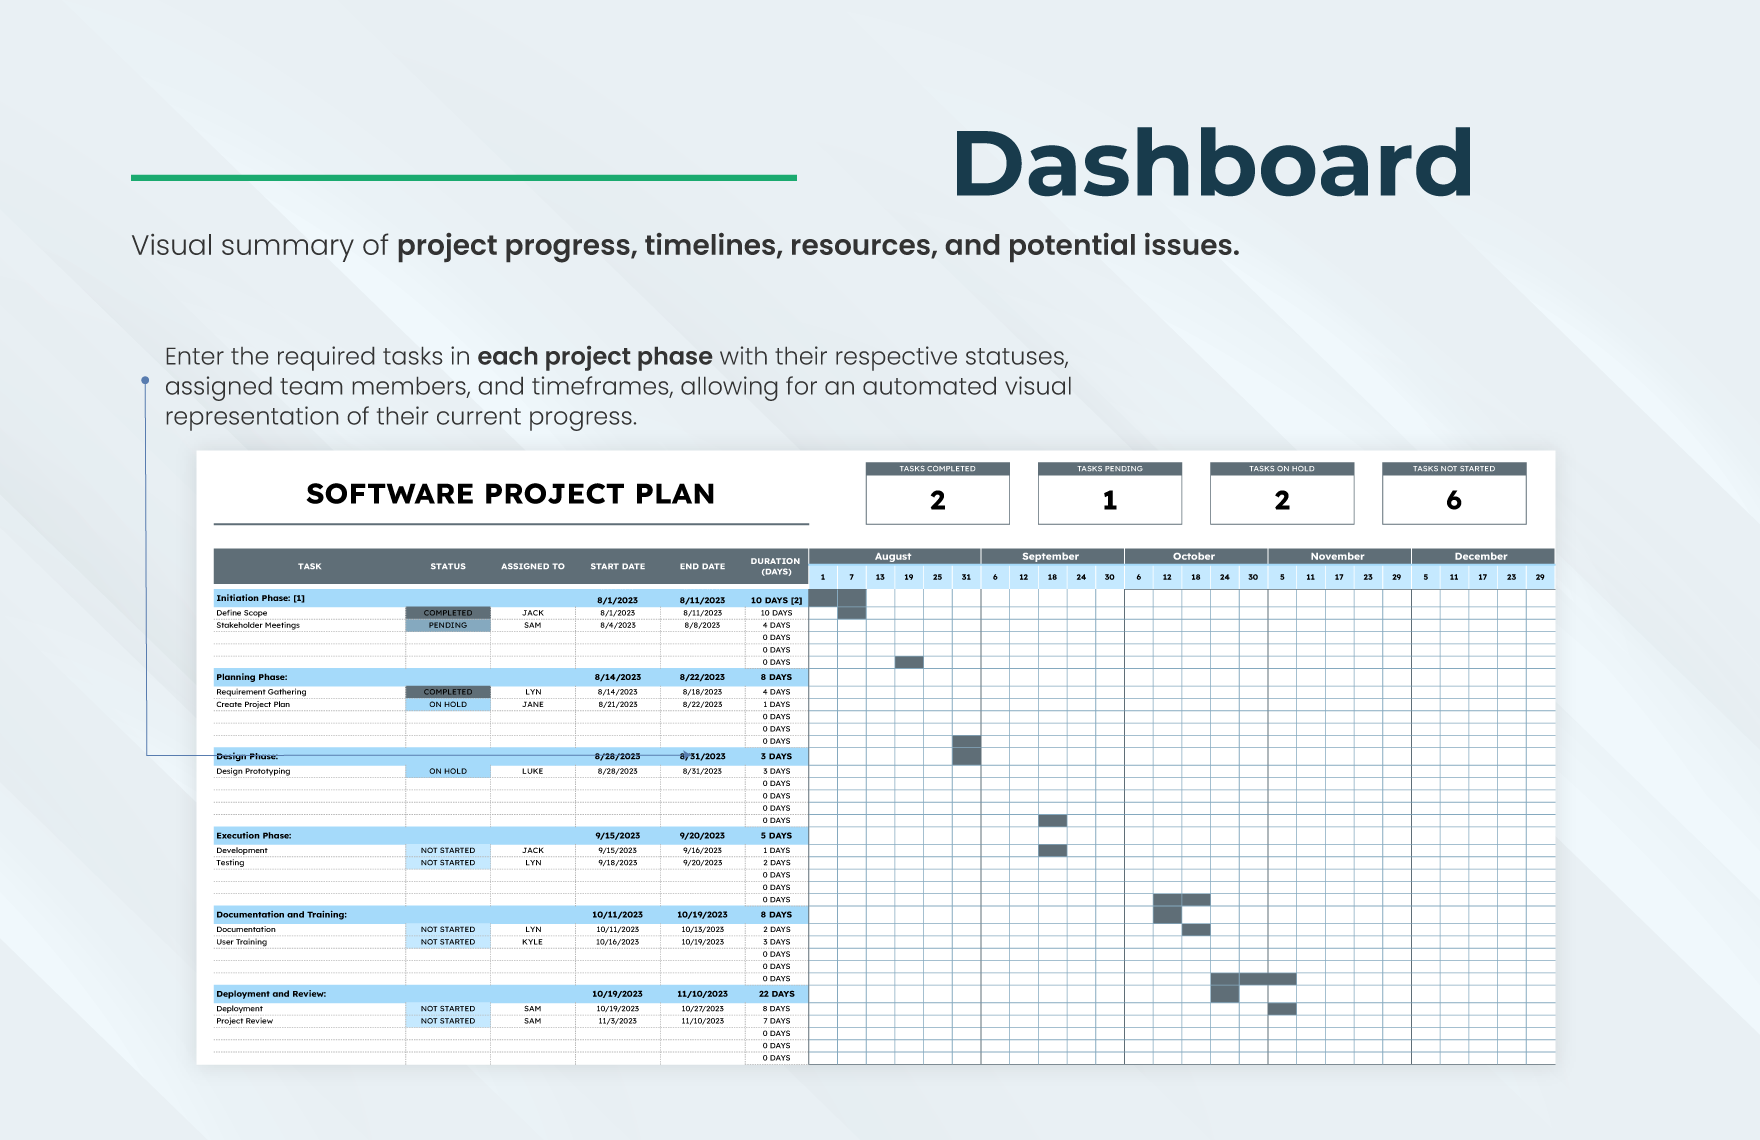 Software Project Plan Template